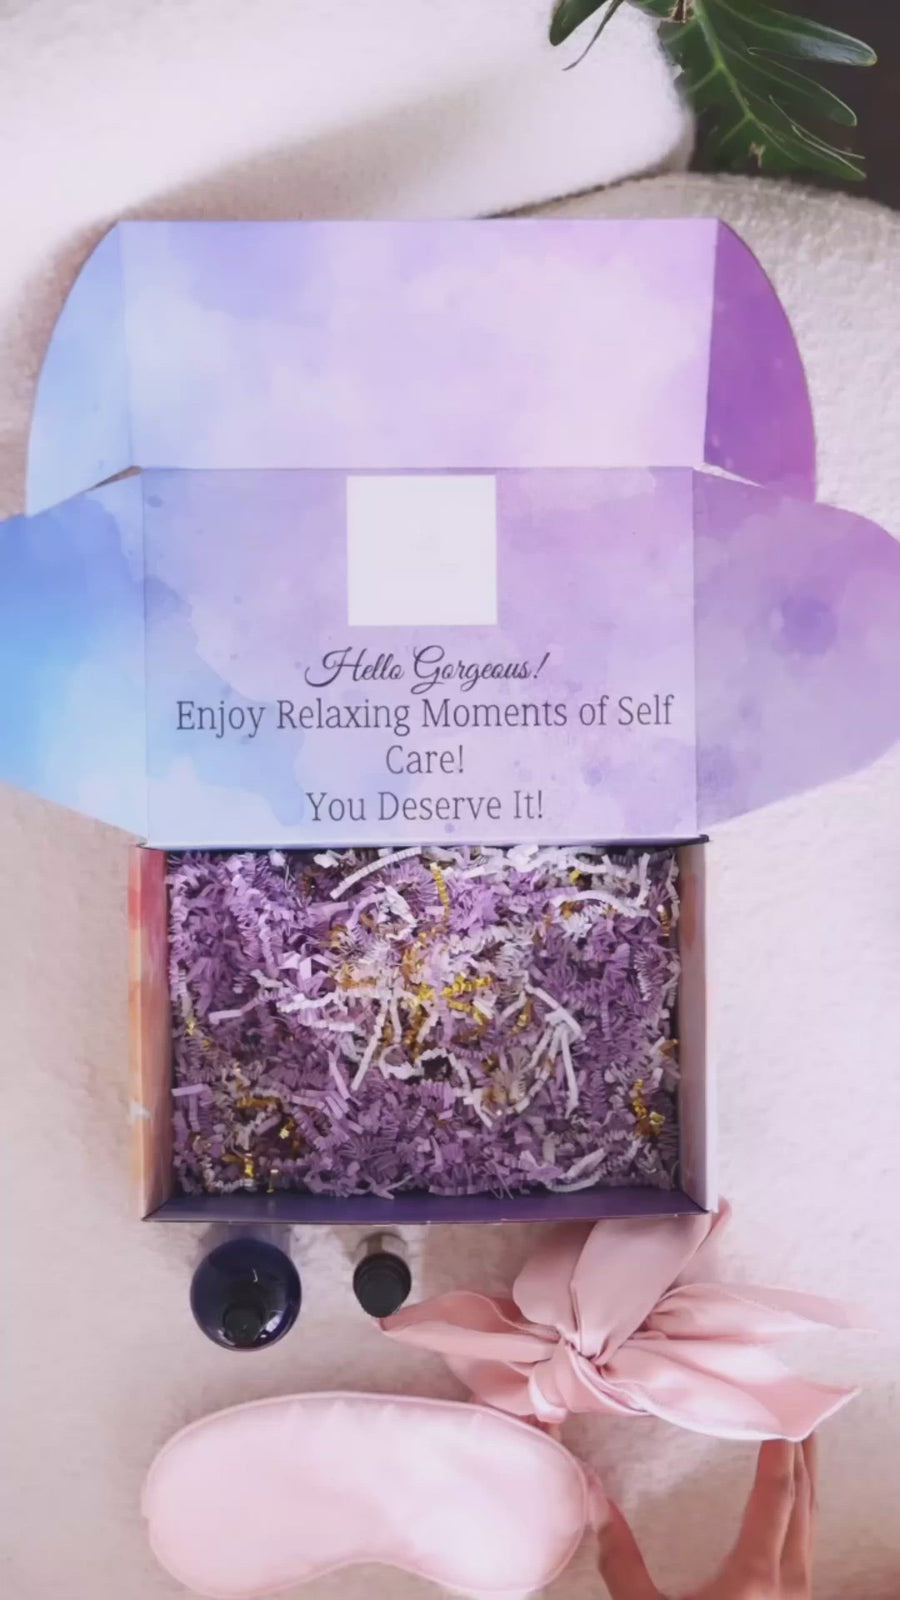 Video of A Loyal Society Dream Queen Self Care Box being packed as a self care gift or care pacakge